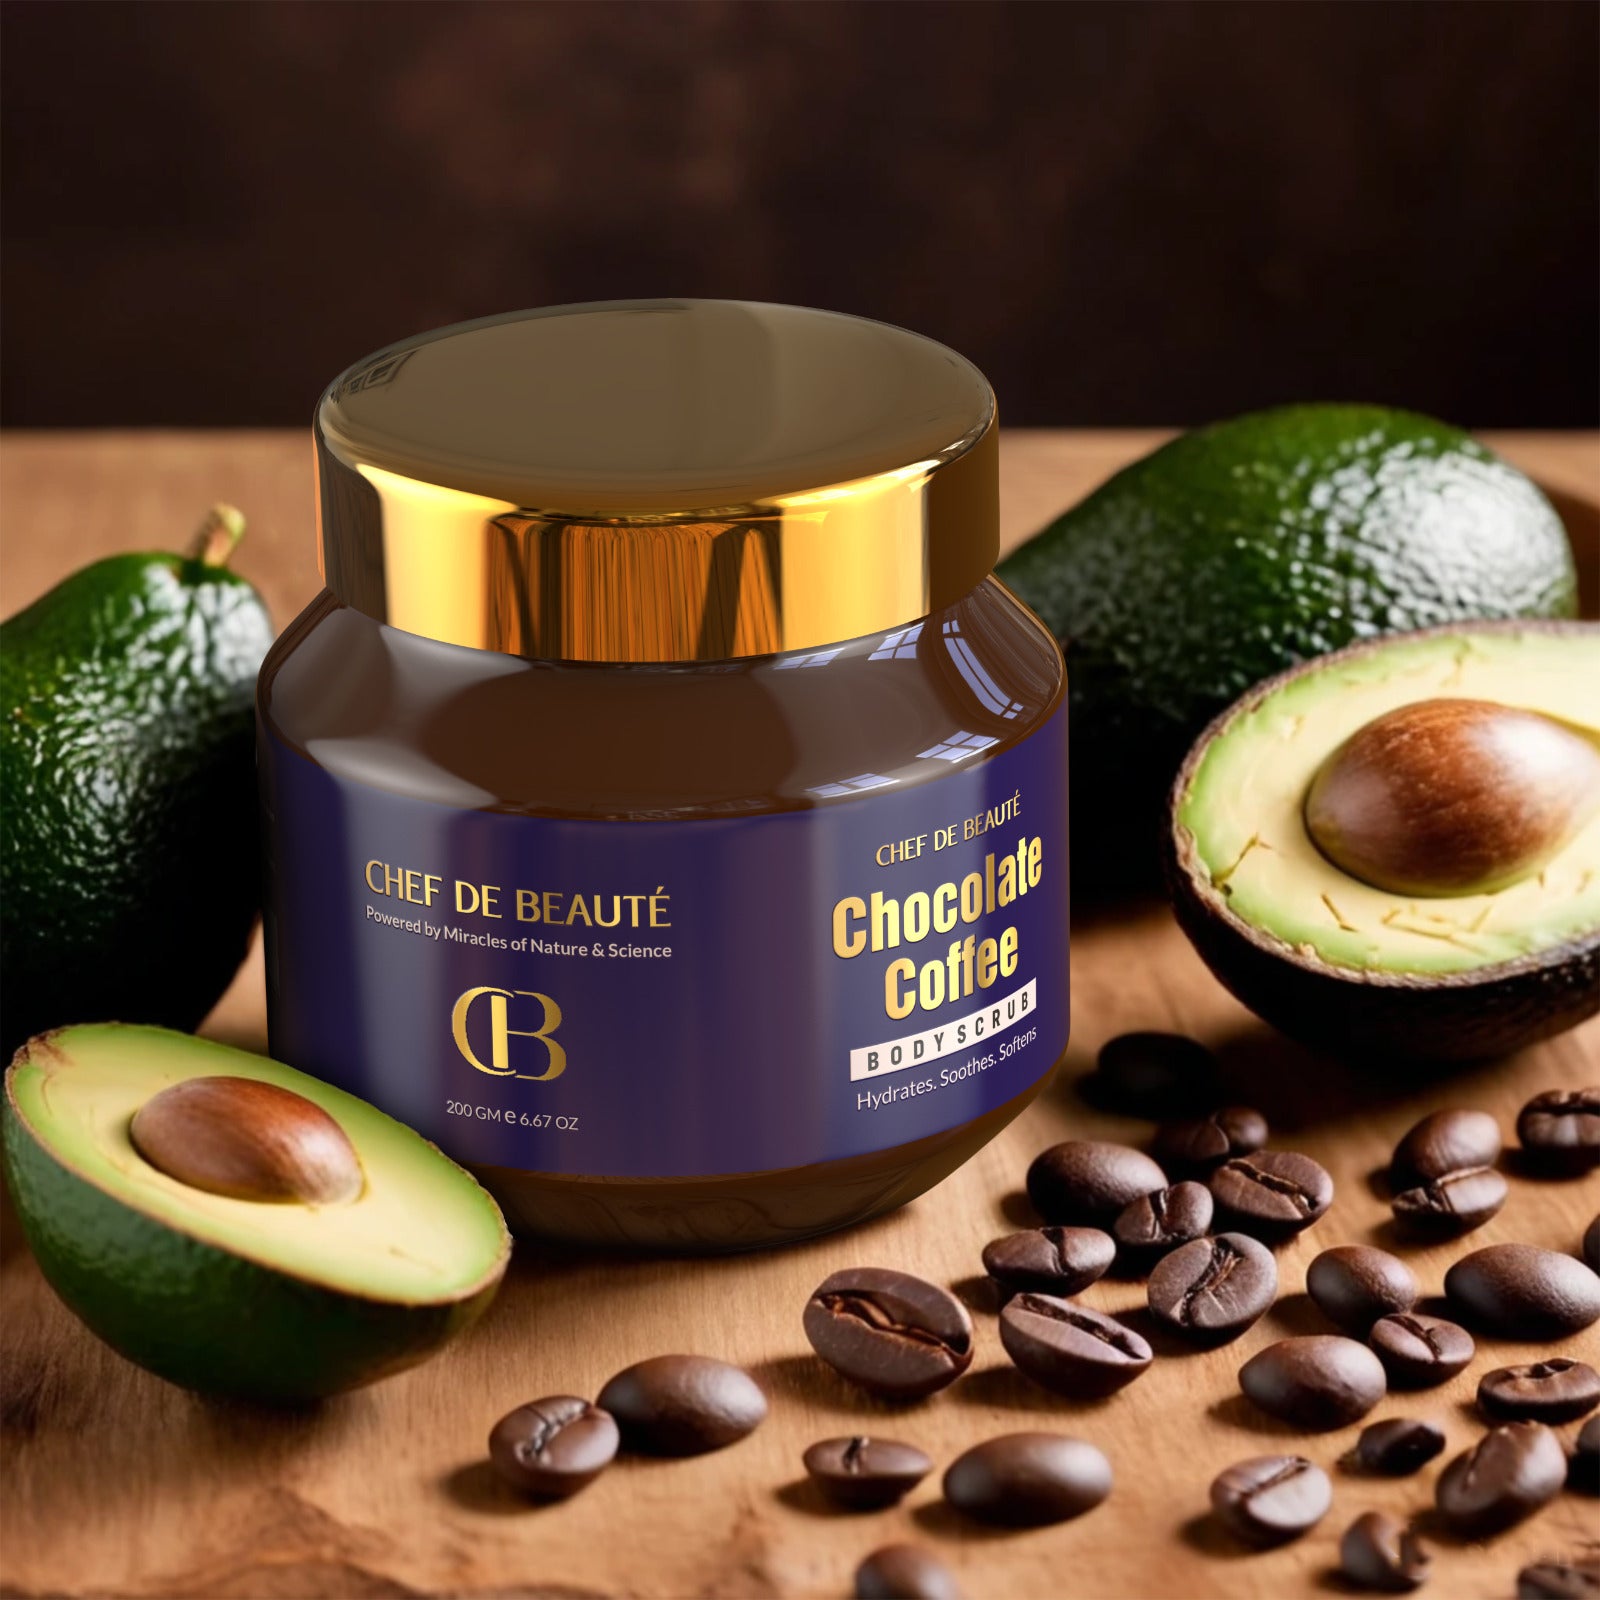 Benefits of Avocado Oil When Applied to Skin